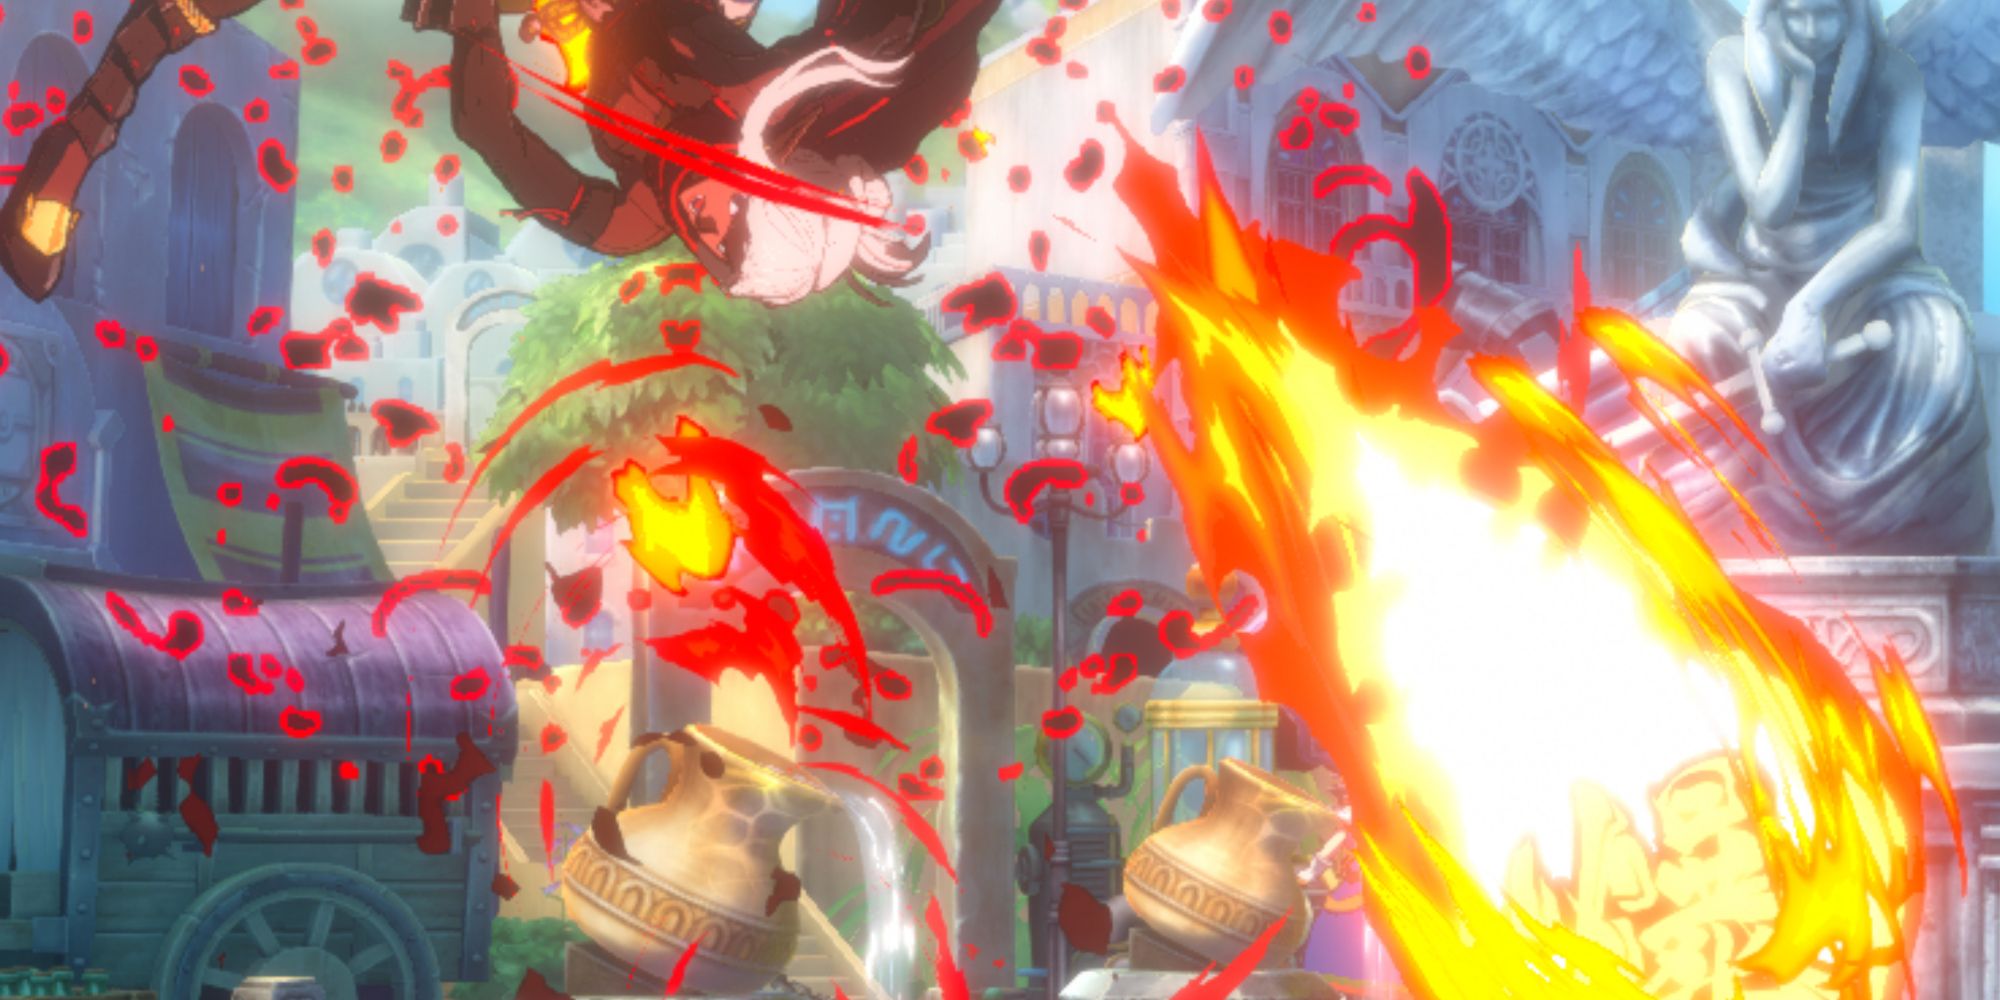 Kunoichi performing the MP Special Move Heavenly Fire Blast in DNF Duel